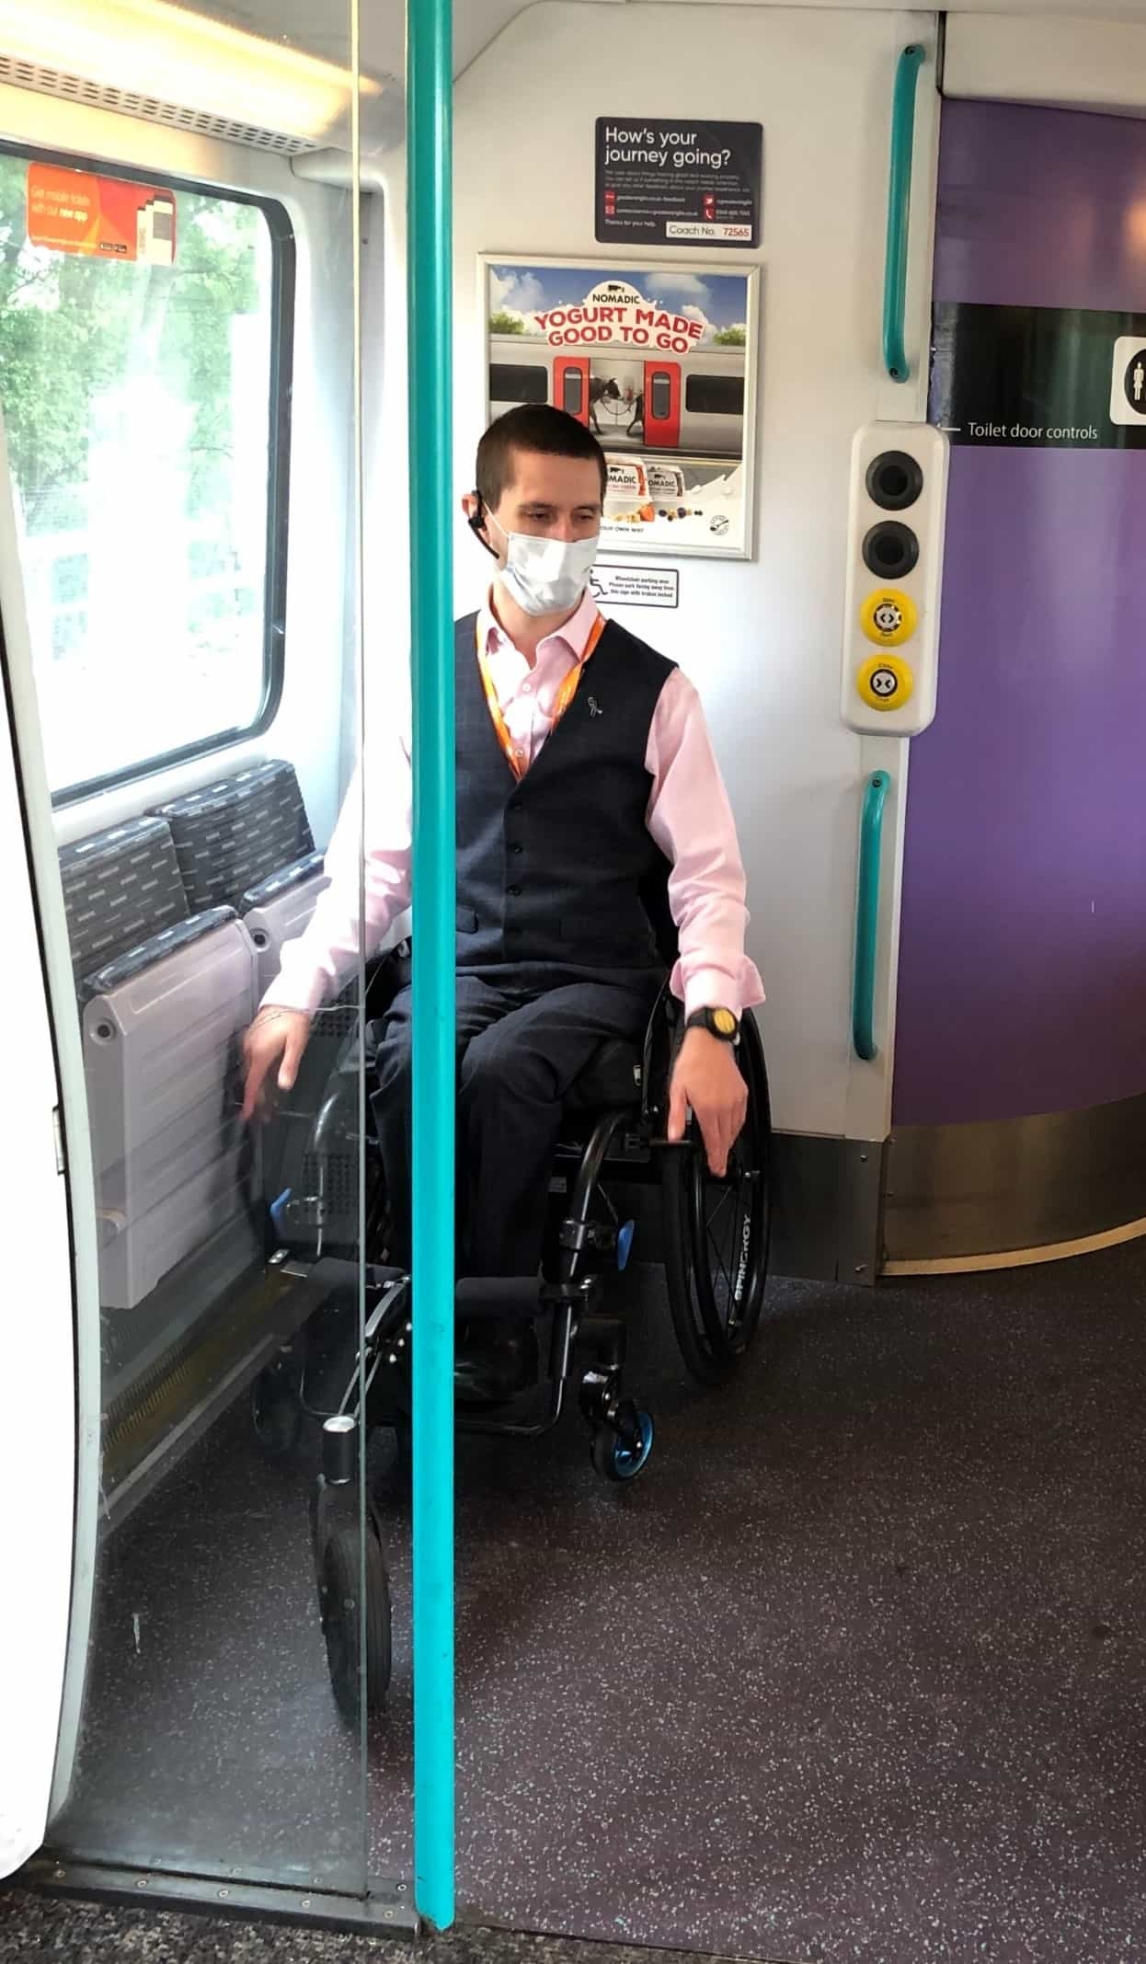 Man wearing a blue face covering sitting in wheelchair on a train